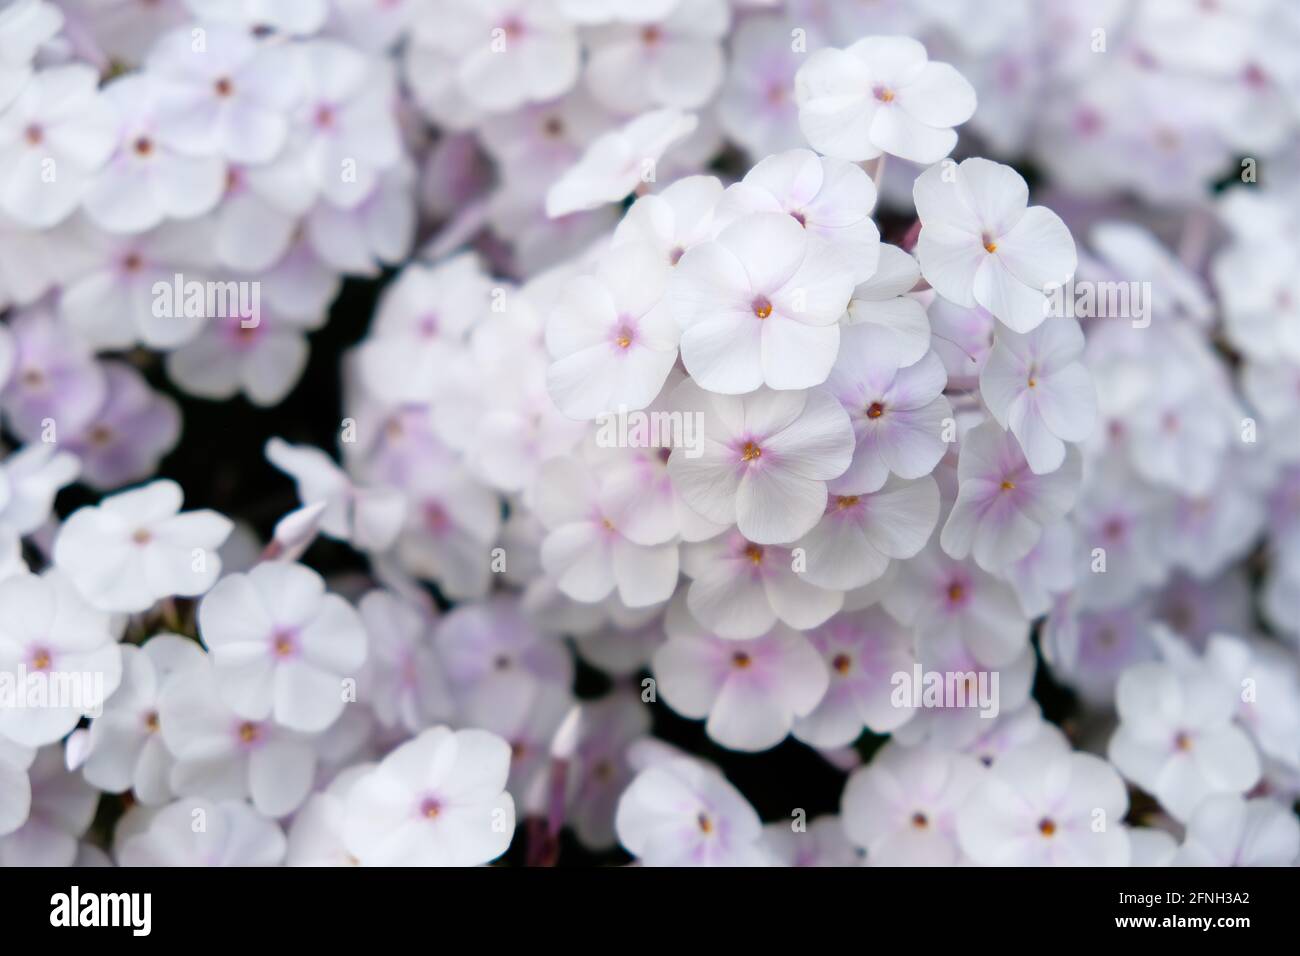 White phlox with pink highlights Stock Photo